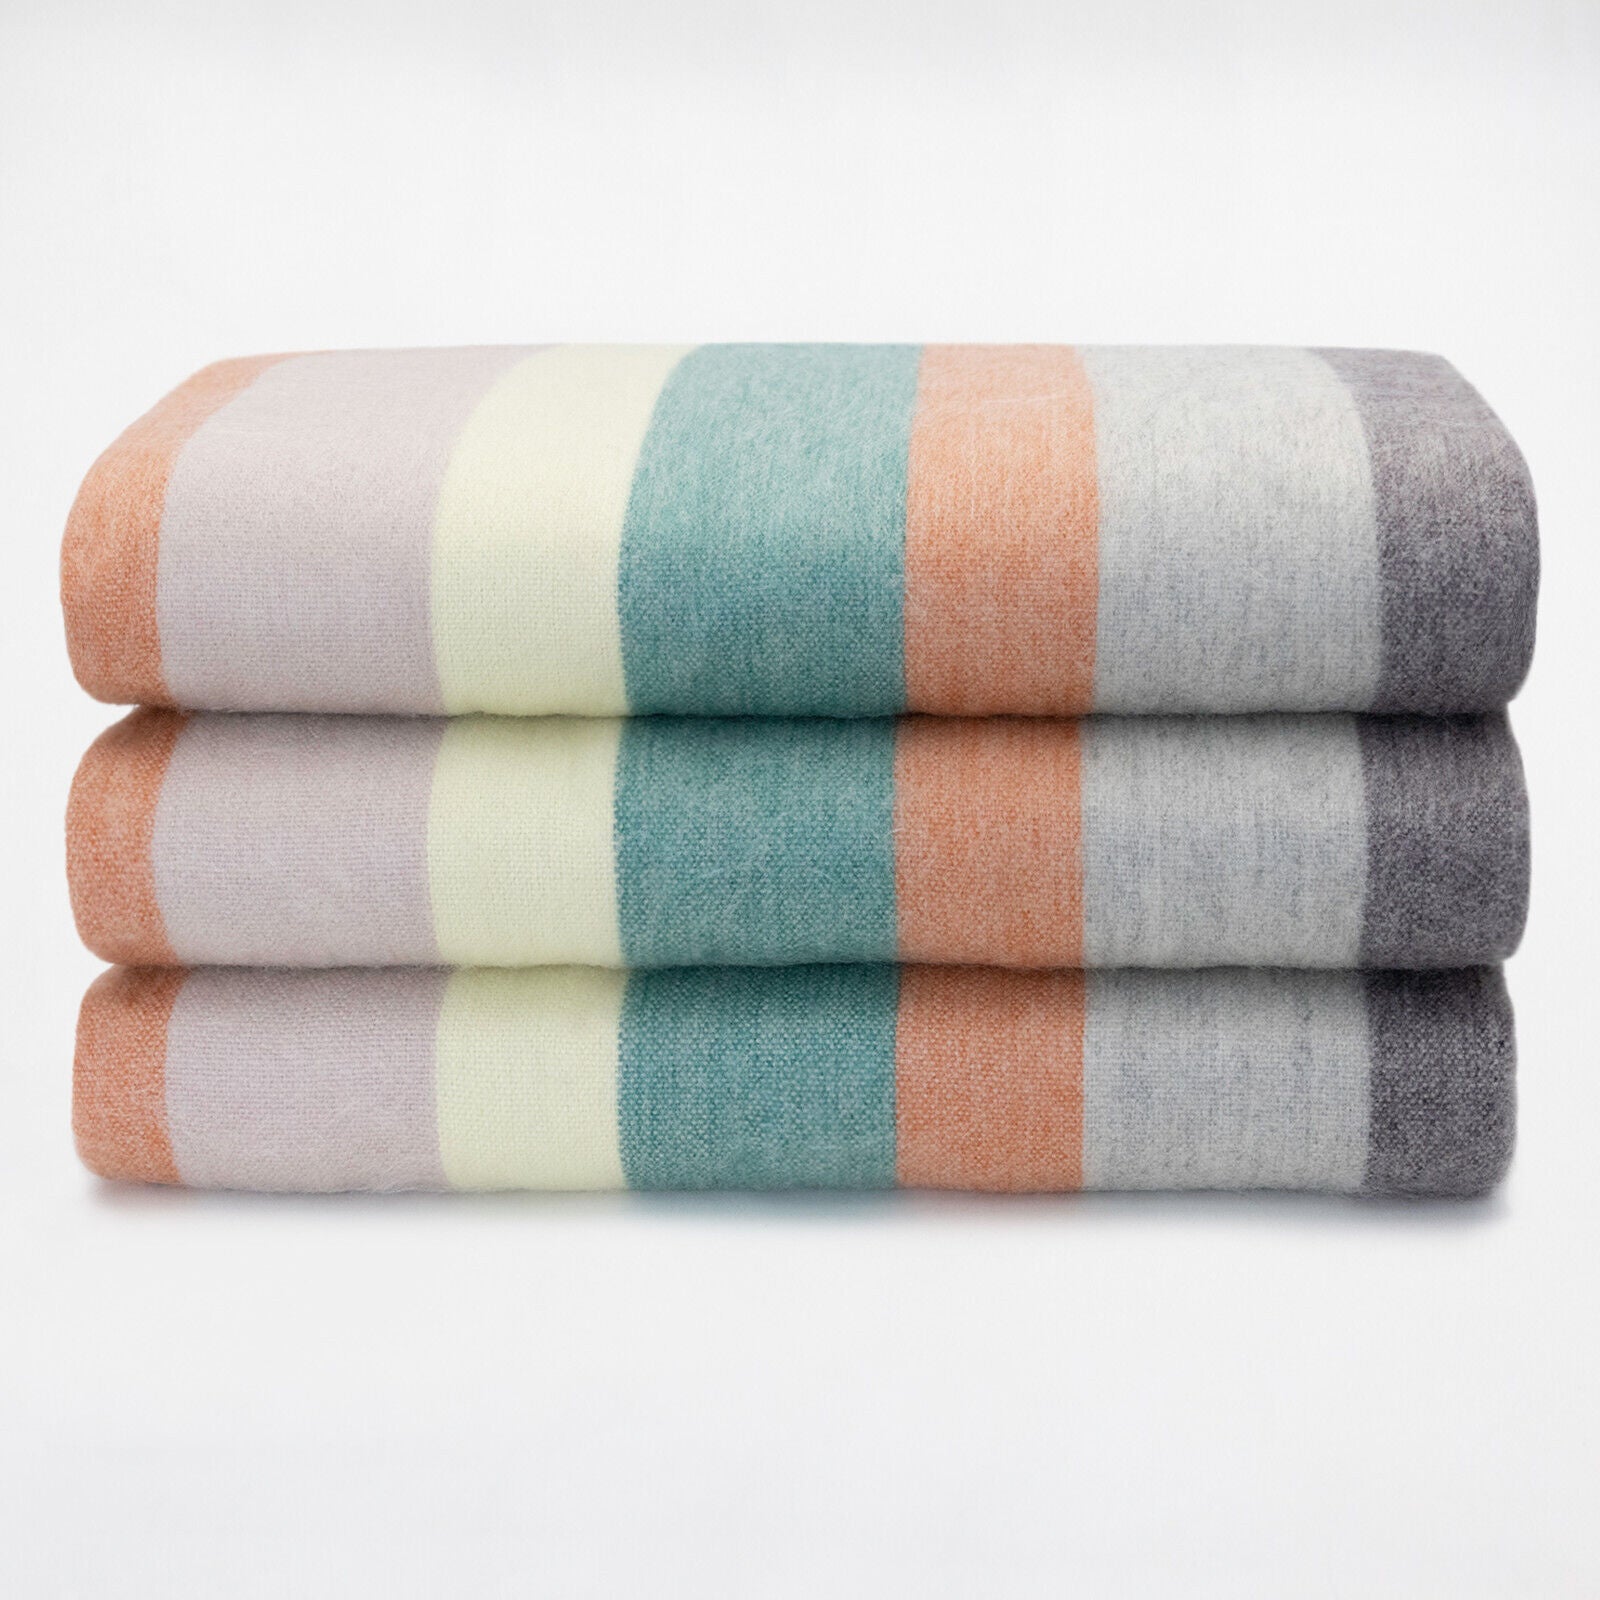 Pambamarca - Baby Alpaca Wool Throw Blanket / Sofa Cover - Queen 96 x 68 in - Spring Meadow - Soft Green/Coral Hues